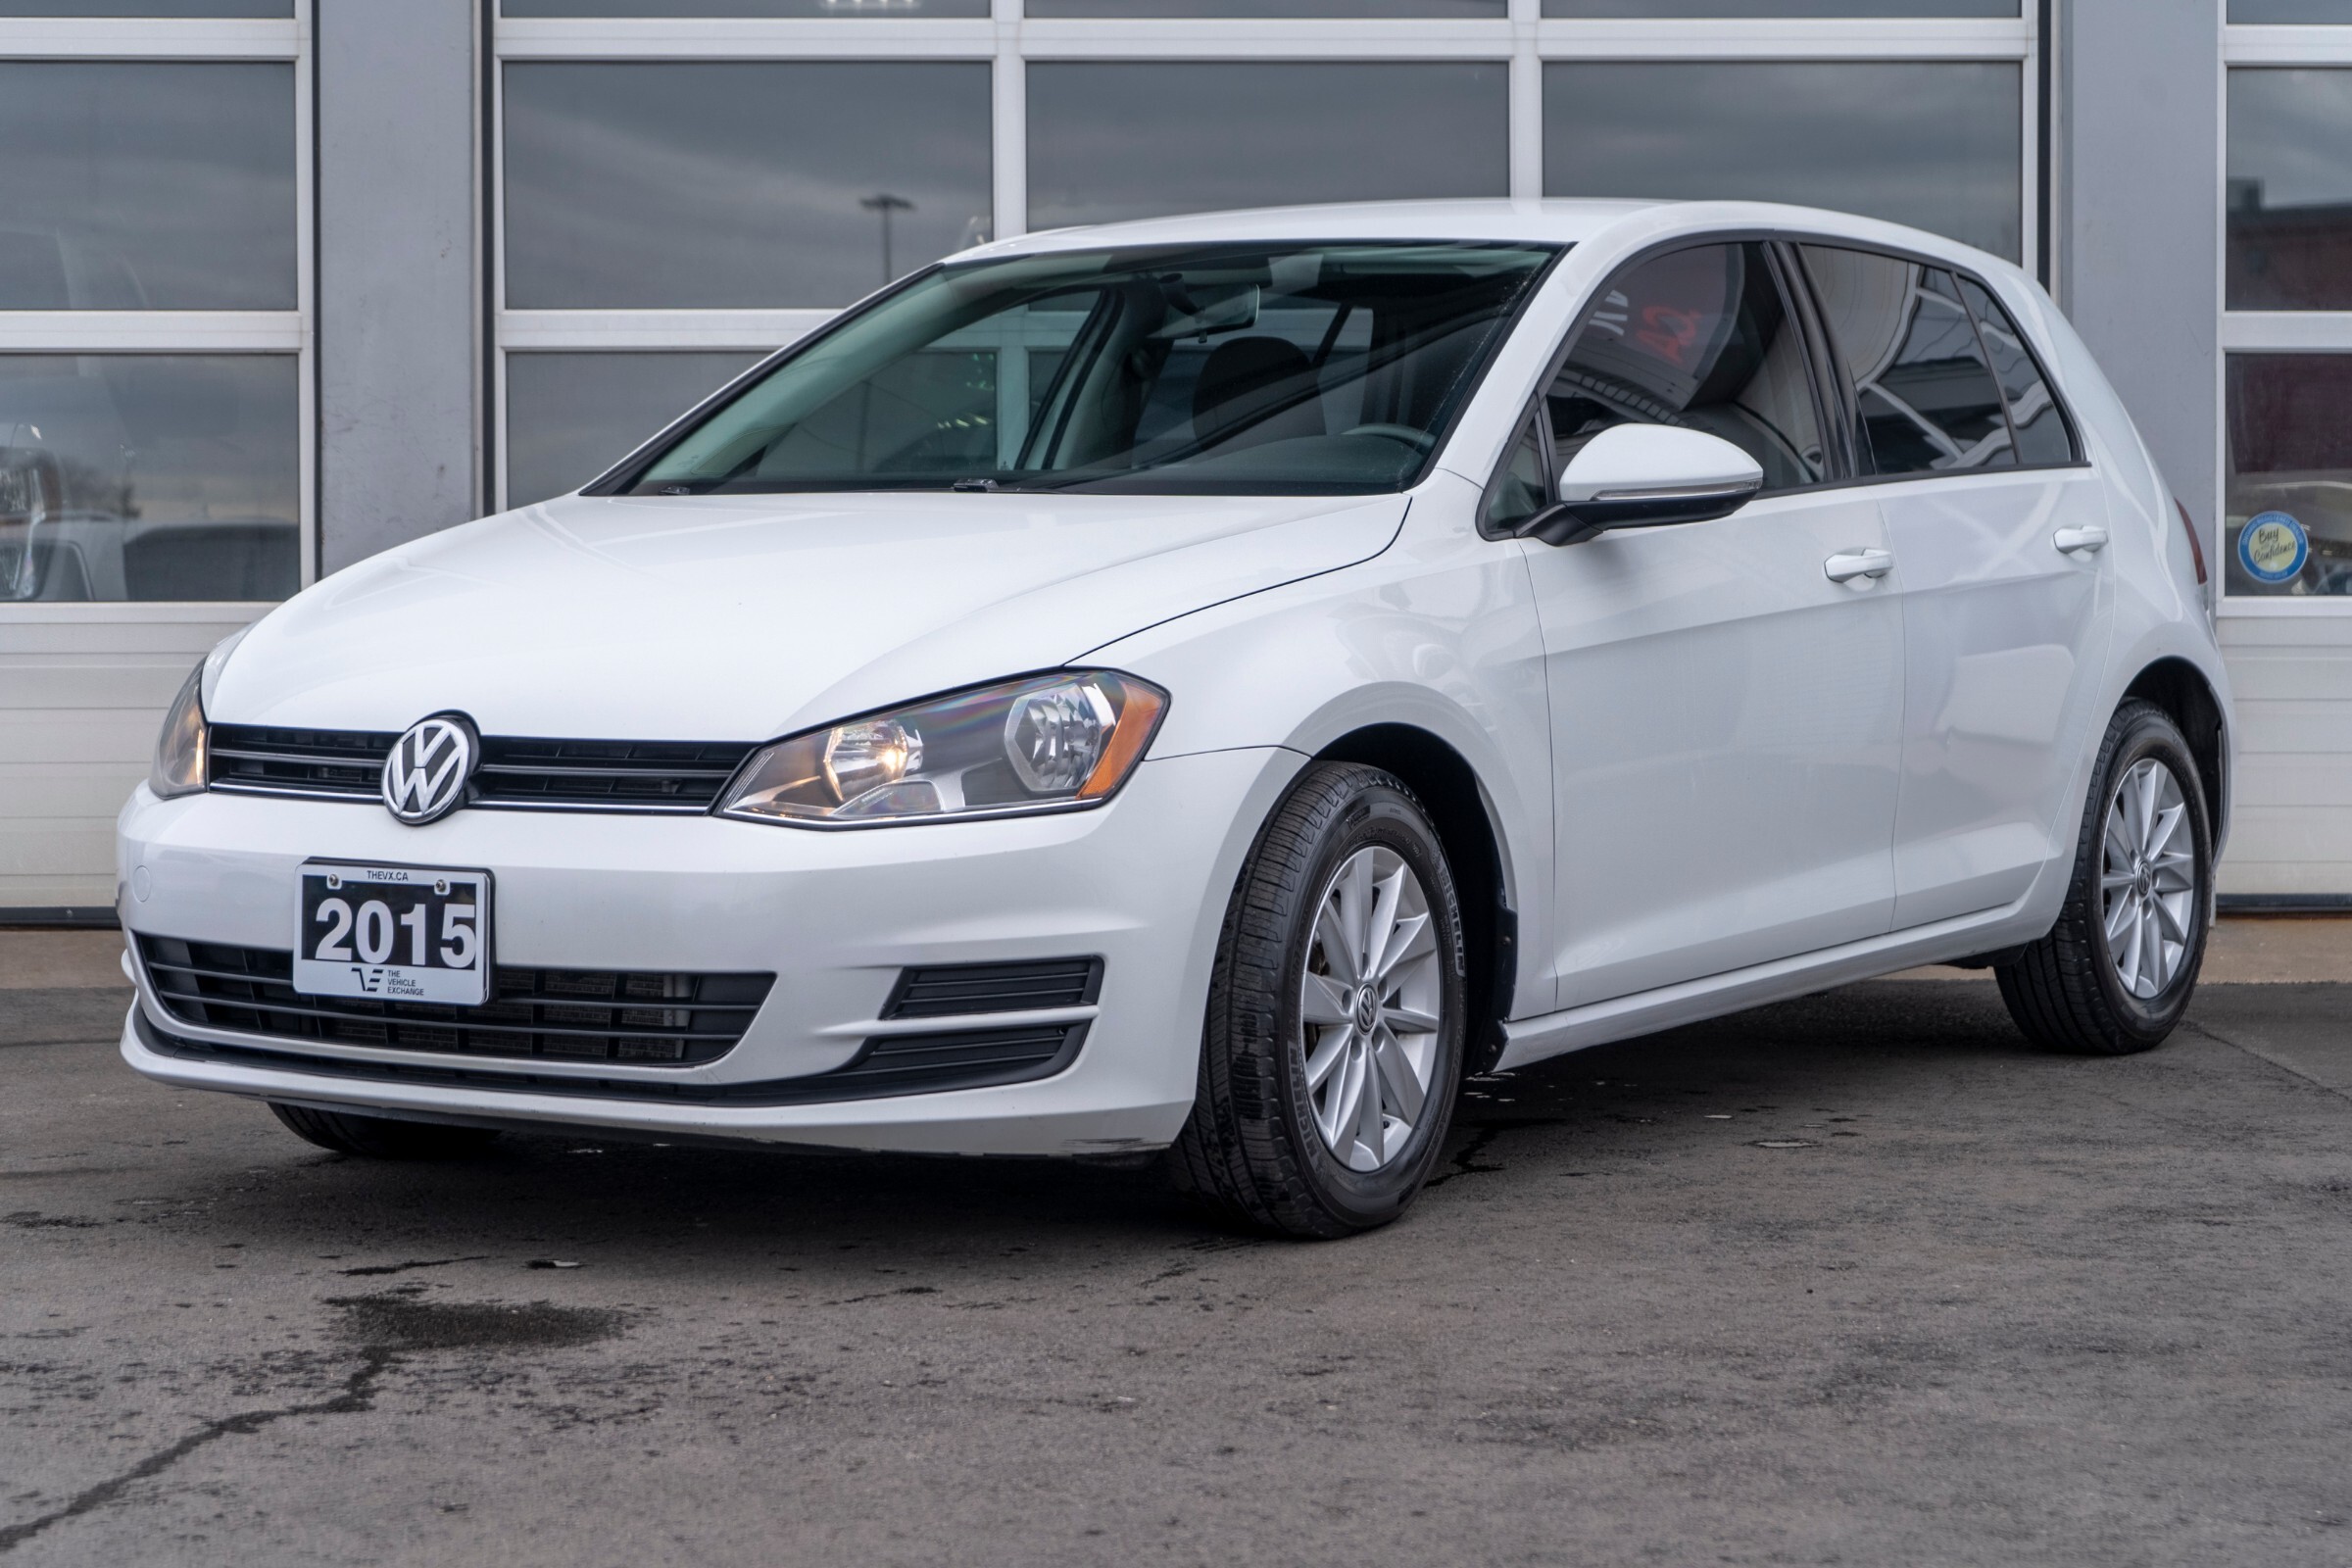 2015 Volkswagen Golf 1.8 TSI| Automatic| No Accidents| B-Cam| Htd Seats